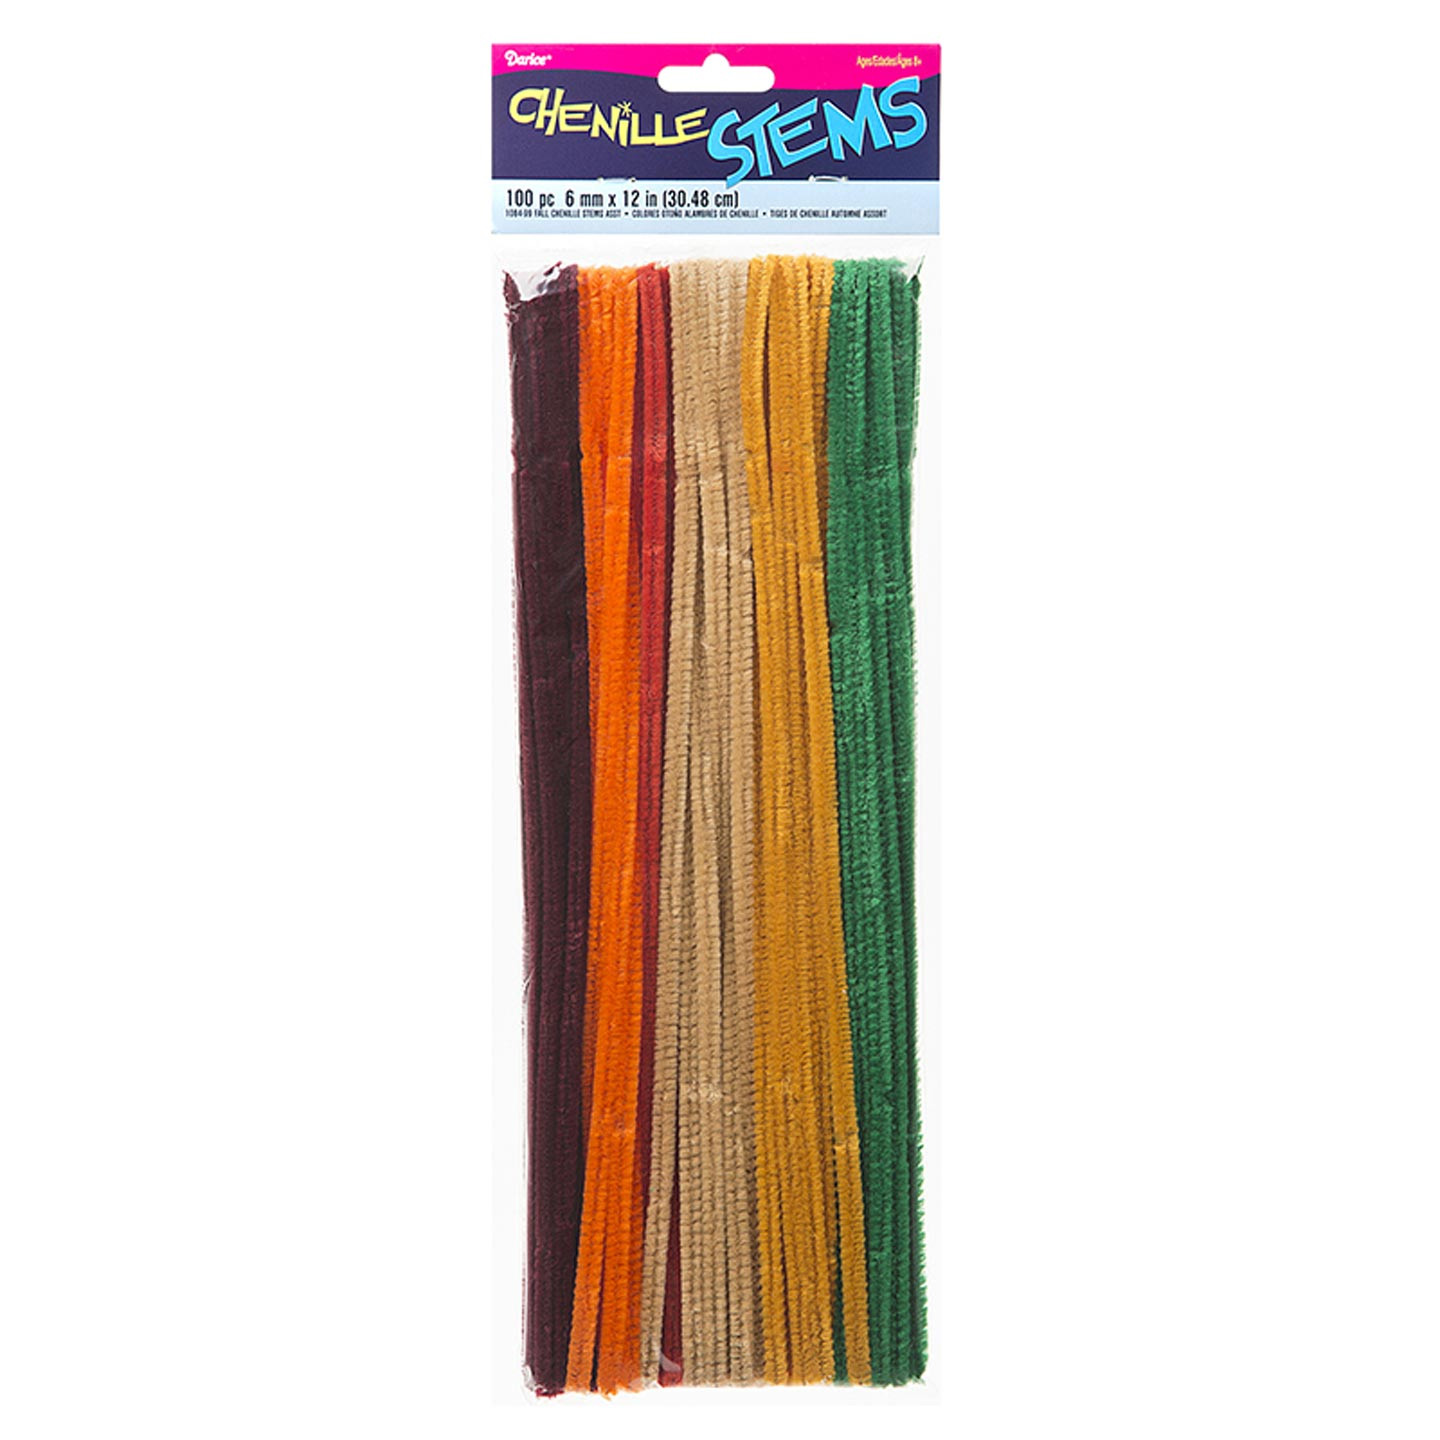 20 Pipe Cleaner Stems: 6mm Chenille Red (50)